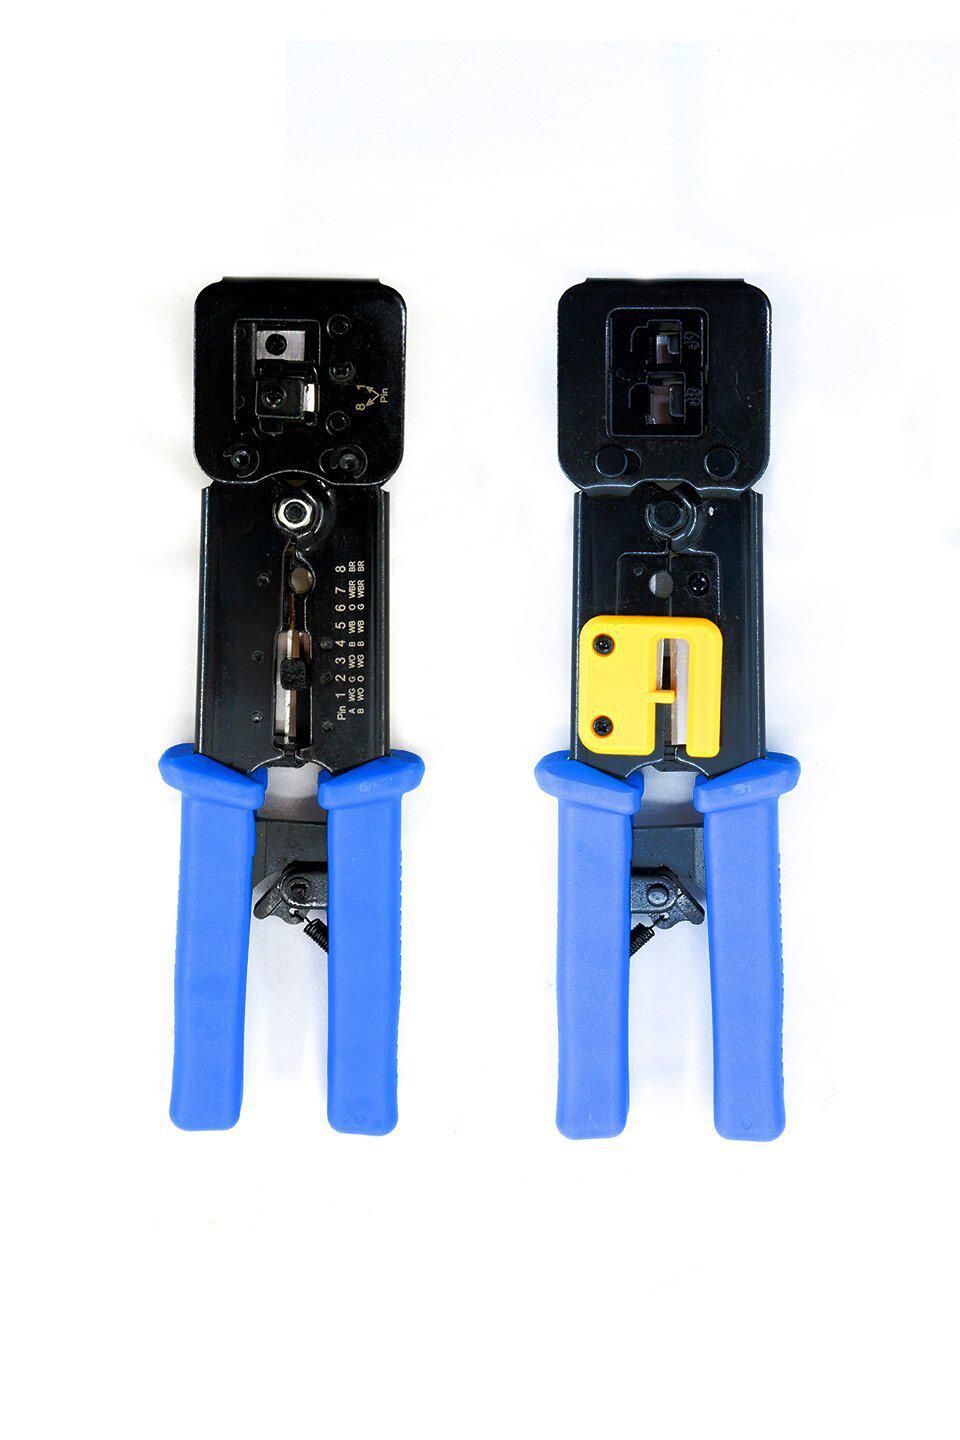 Easyconnect Ez-rj45 Crimp Tool Perfect For All Installations